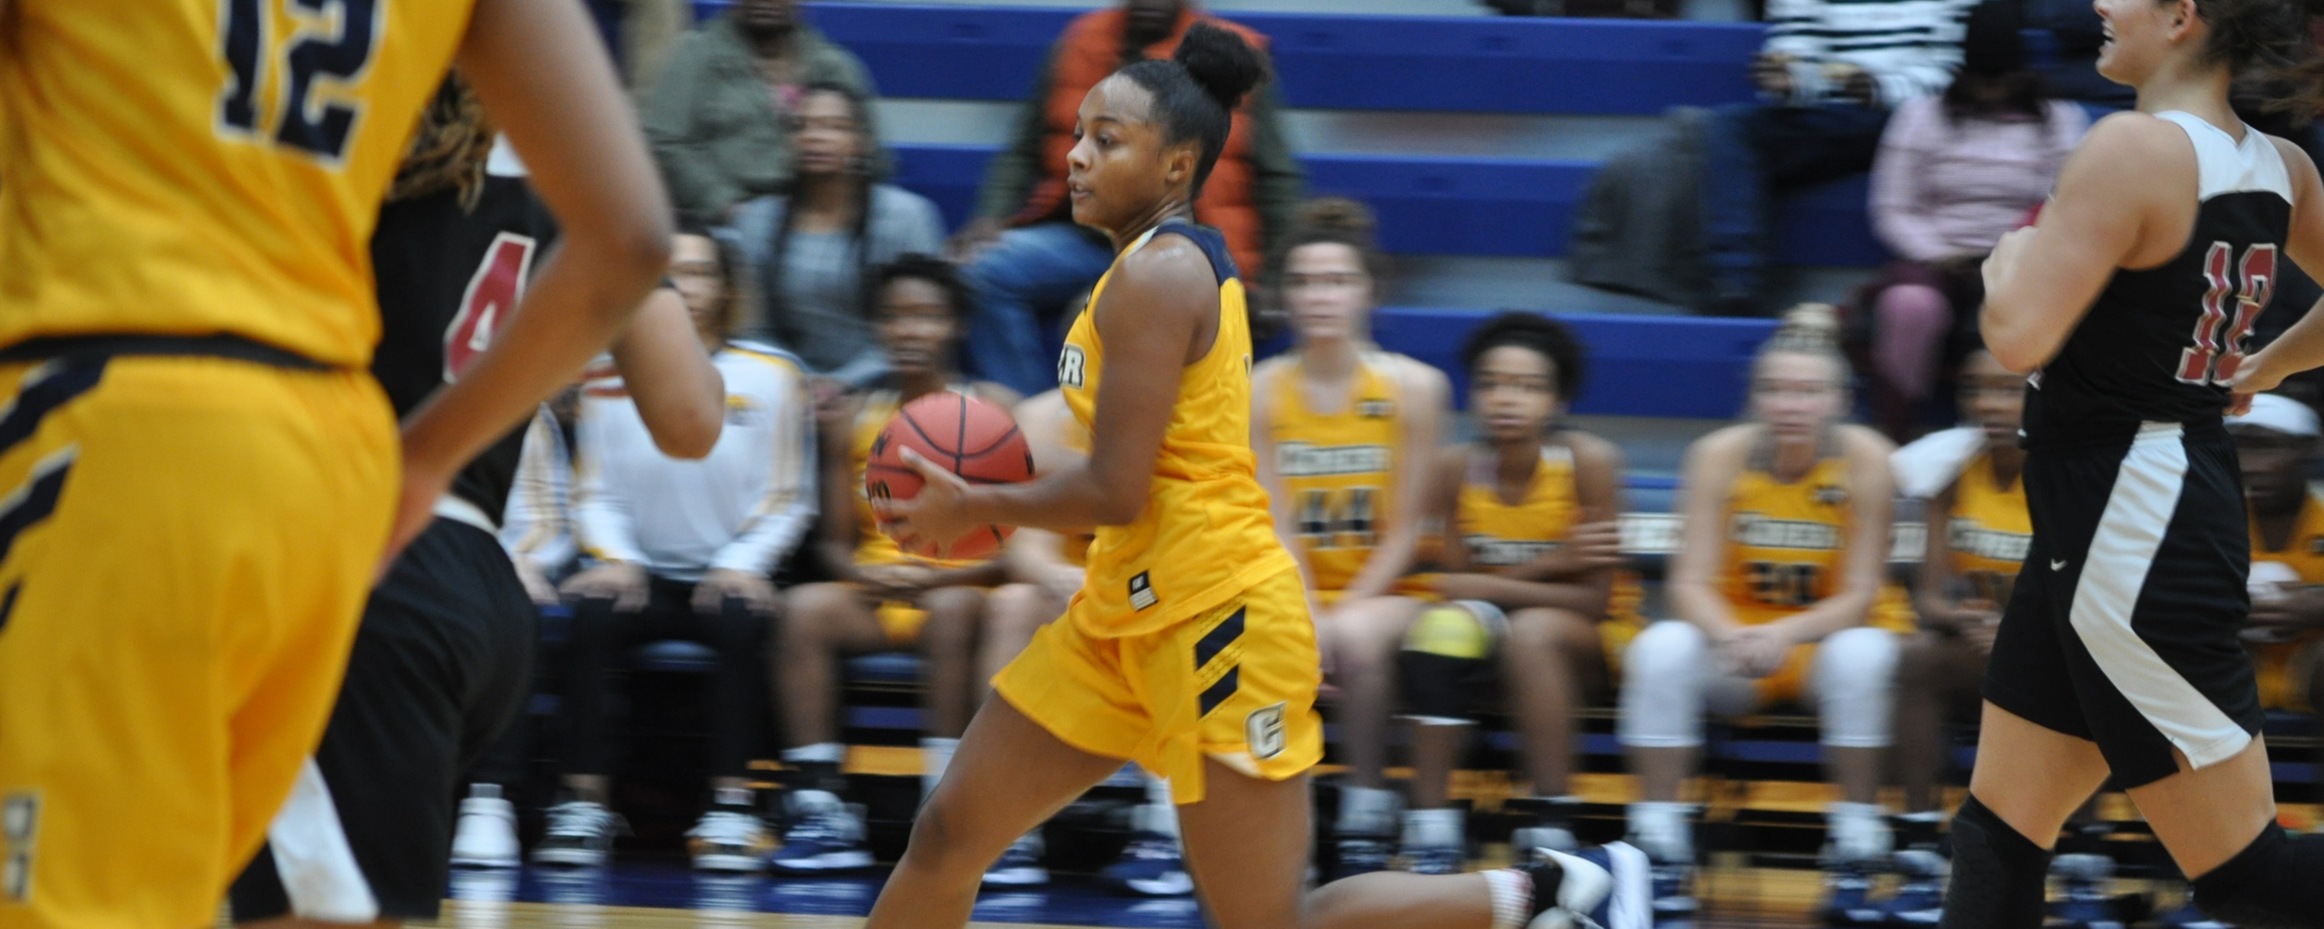 Women's Basketball Battles, but Falls to Catawba Wednesday Night in Conference Action